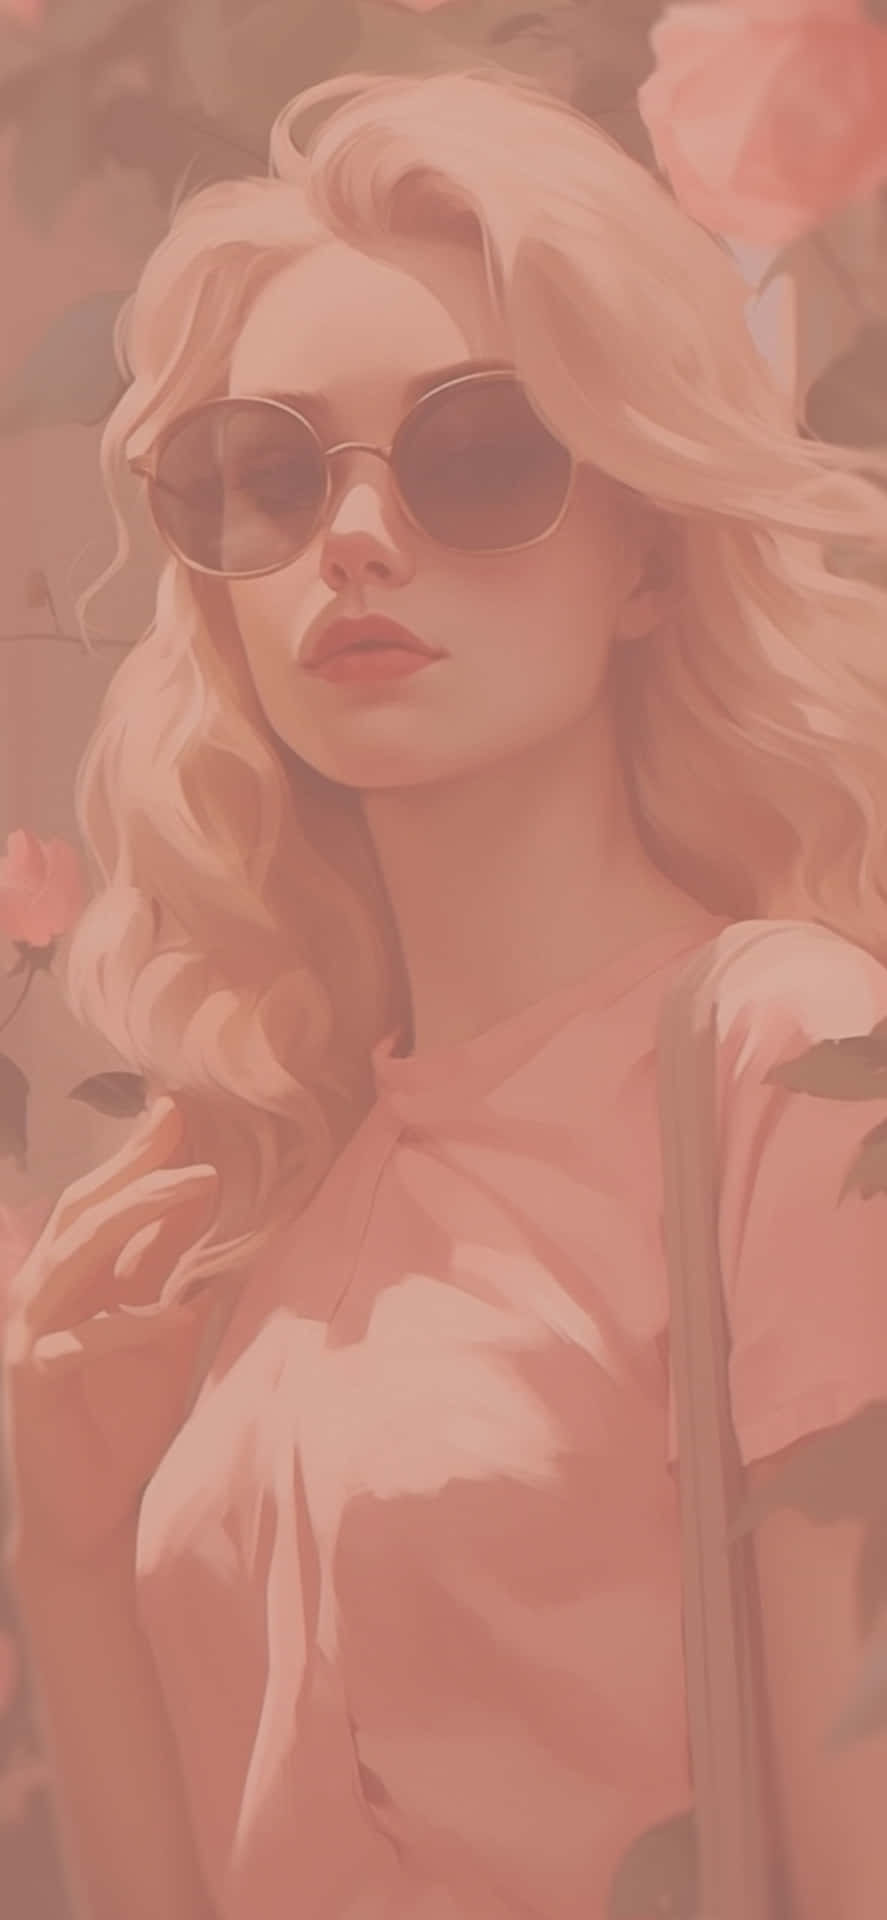 Preppy Girl In Pink With Sunglasses Wallpaper